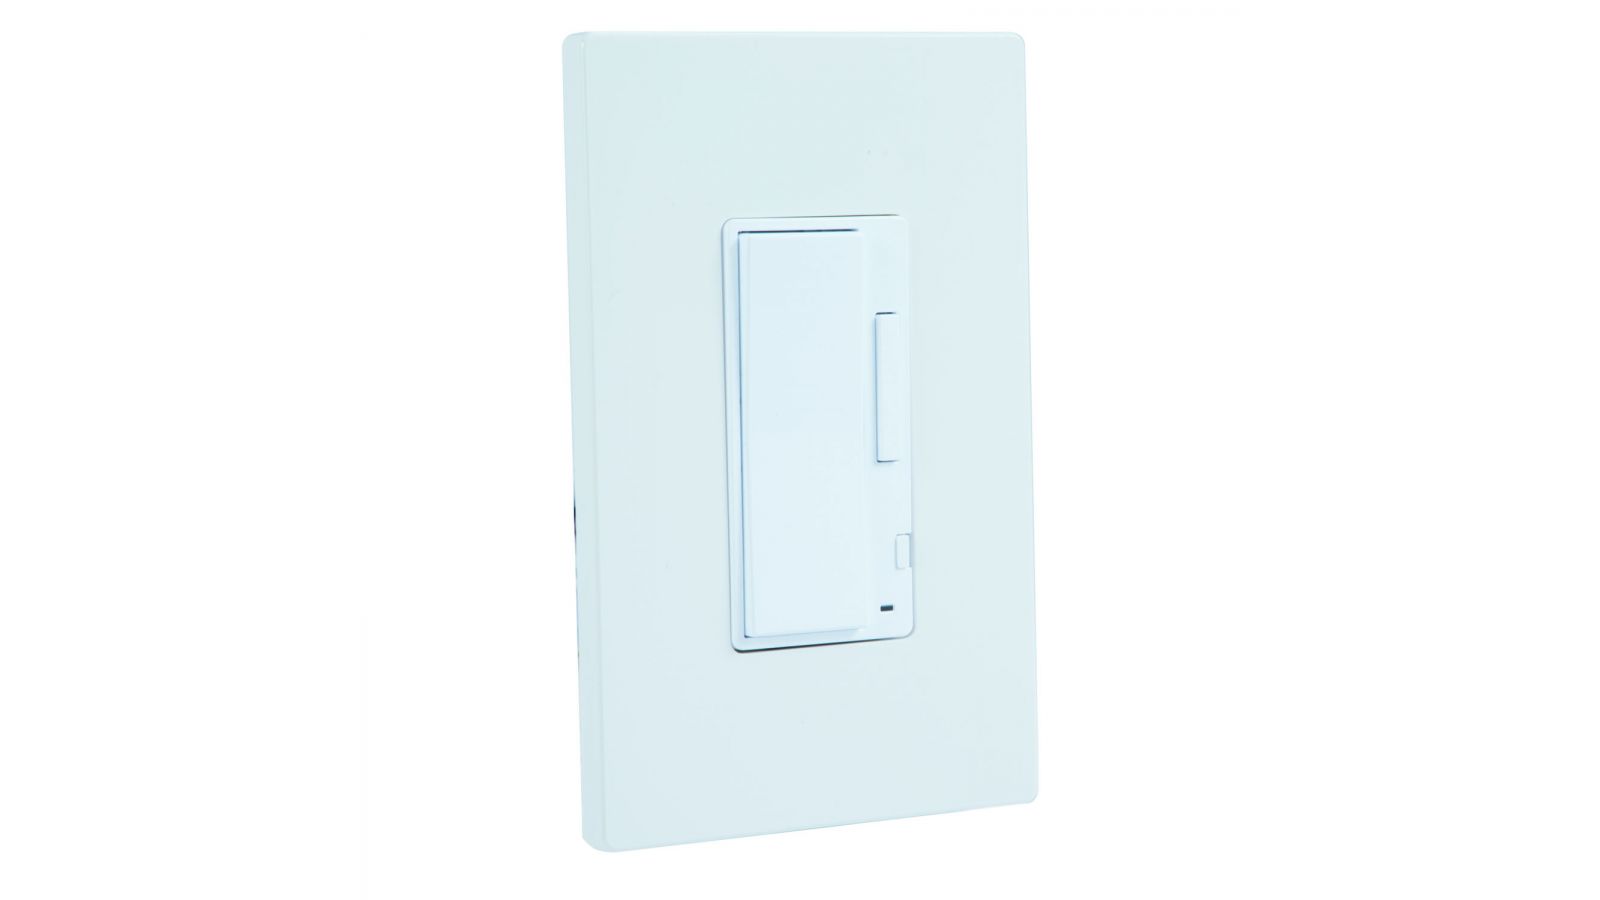 HALO Home In-Wall Smart Dimmer